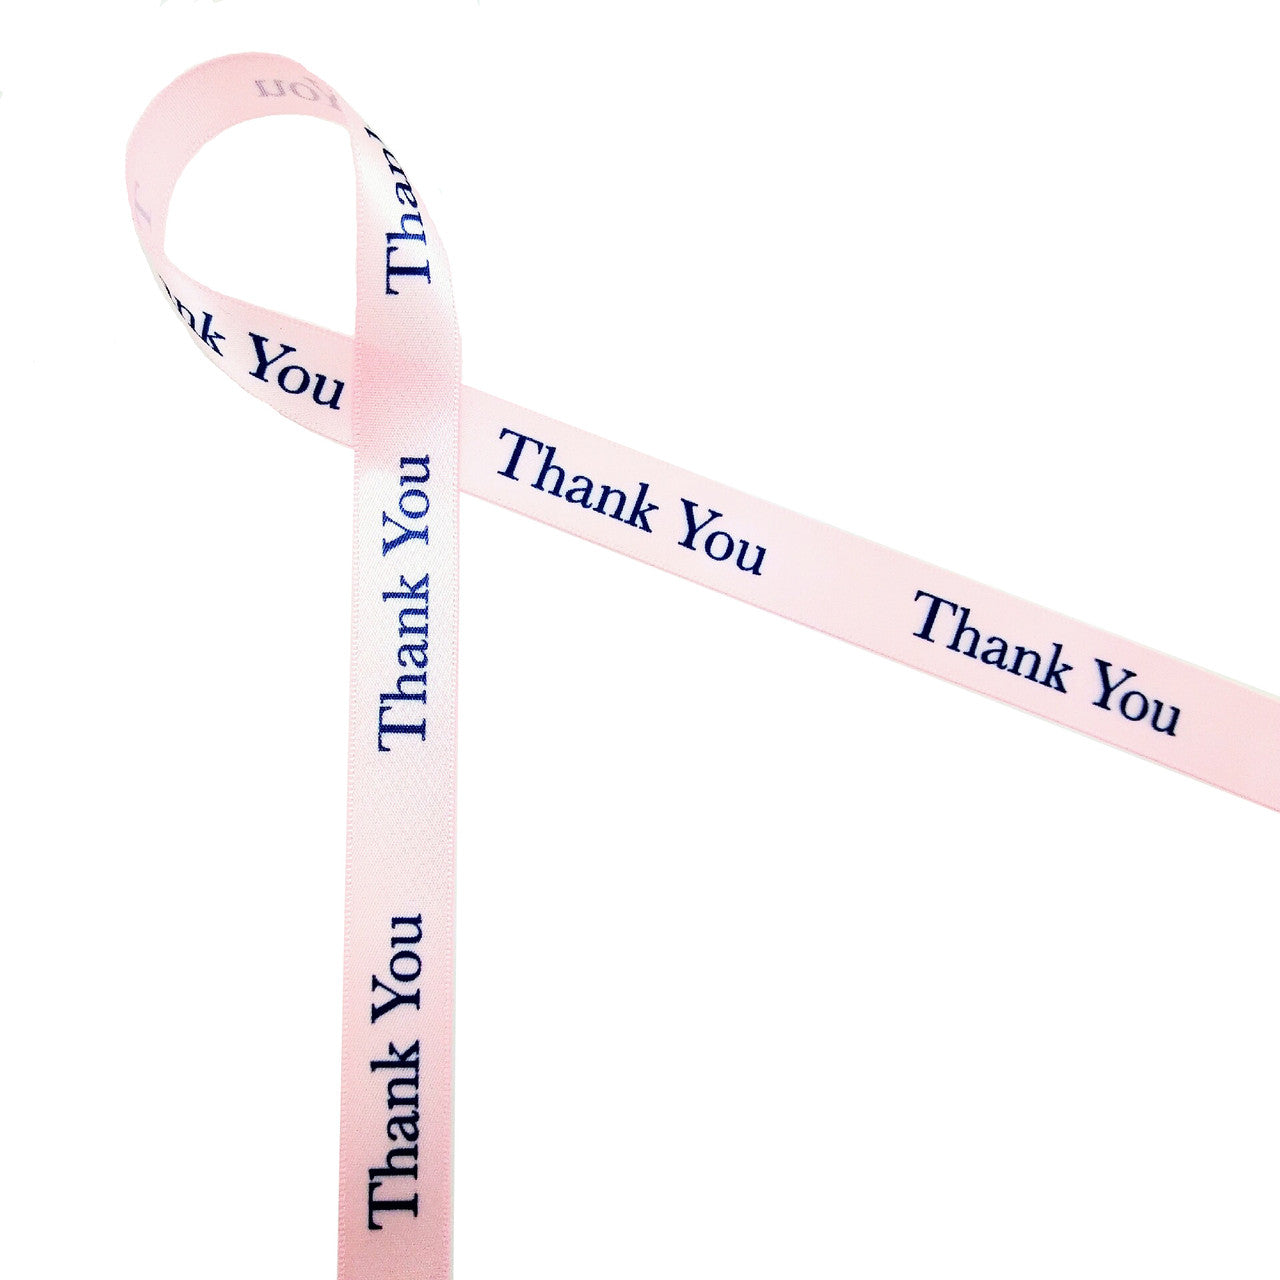 Thank you in navy on lt. pink 5/8" single face satin ribbon